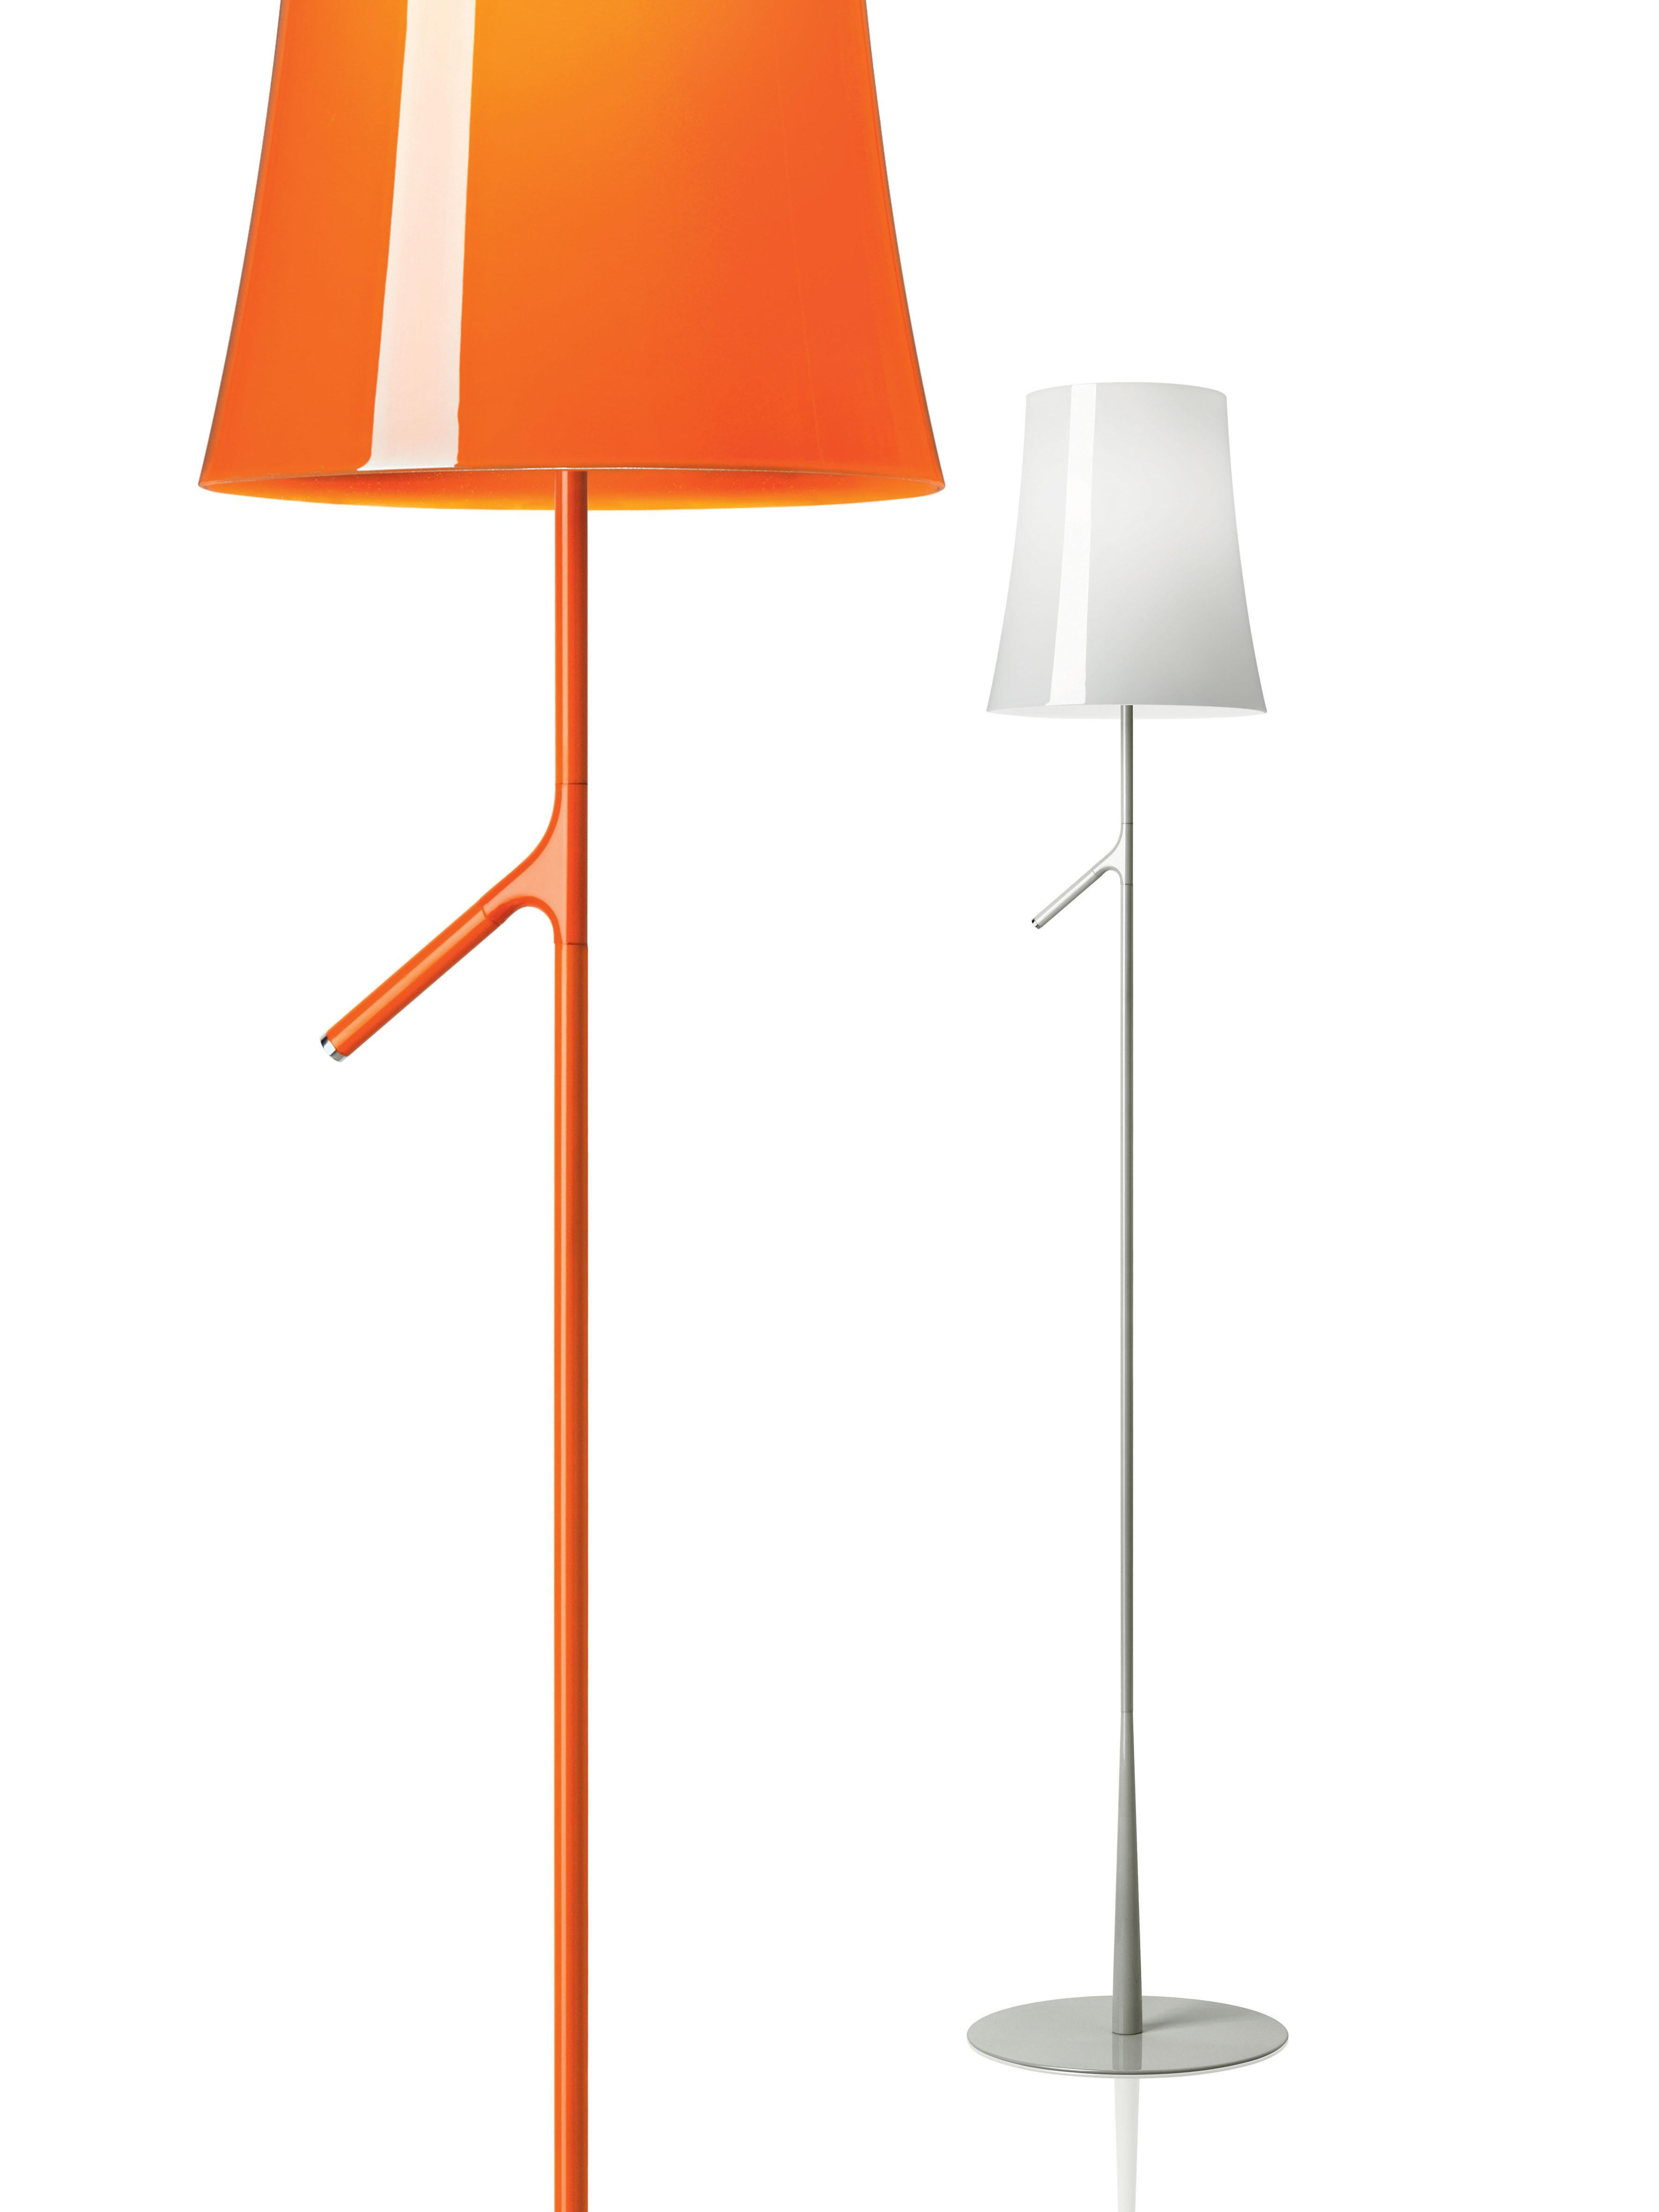 Modern Foscarini Dimmable Birdie Floor Lamp in White by Ludovica & Roberto Palomba For Sale